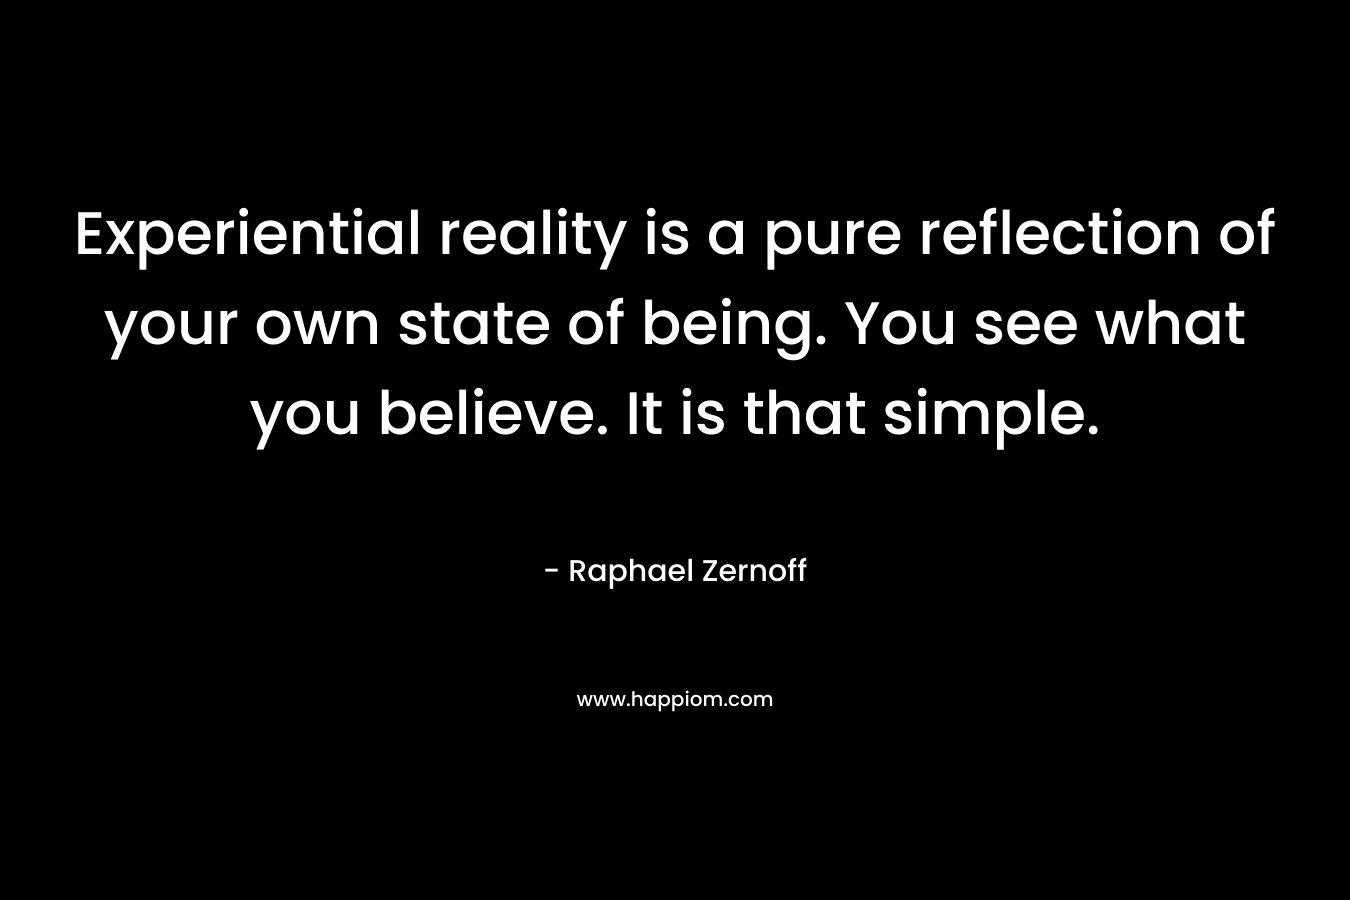 Experiential reality is a pure reflection of your own state of being. You see what you believe. It is that simple.